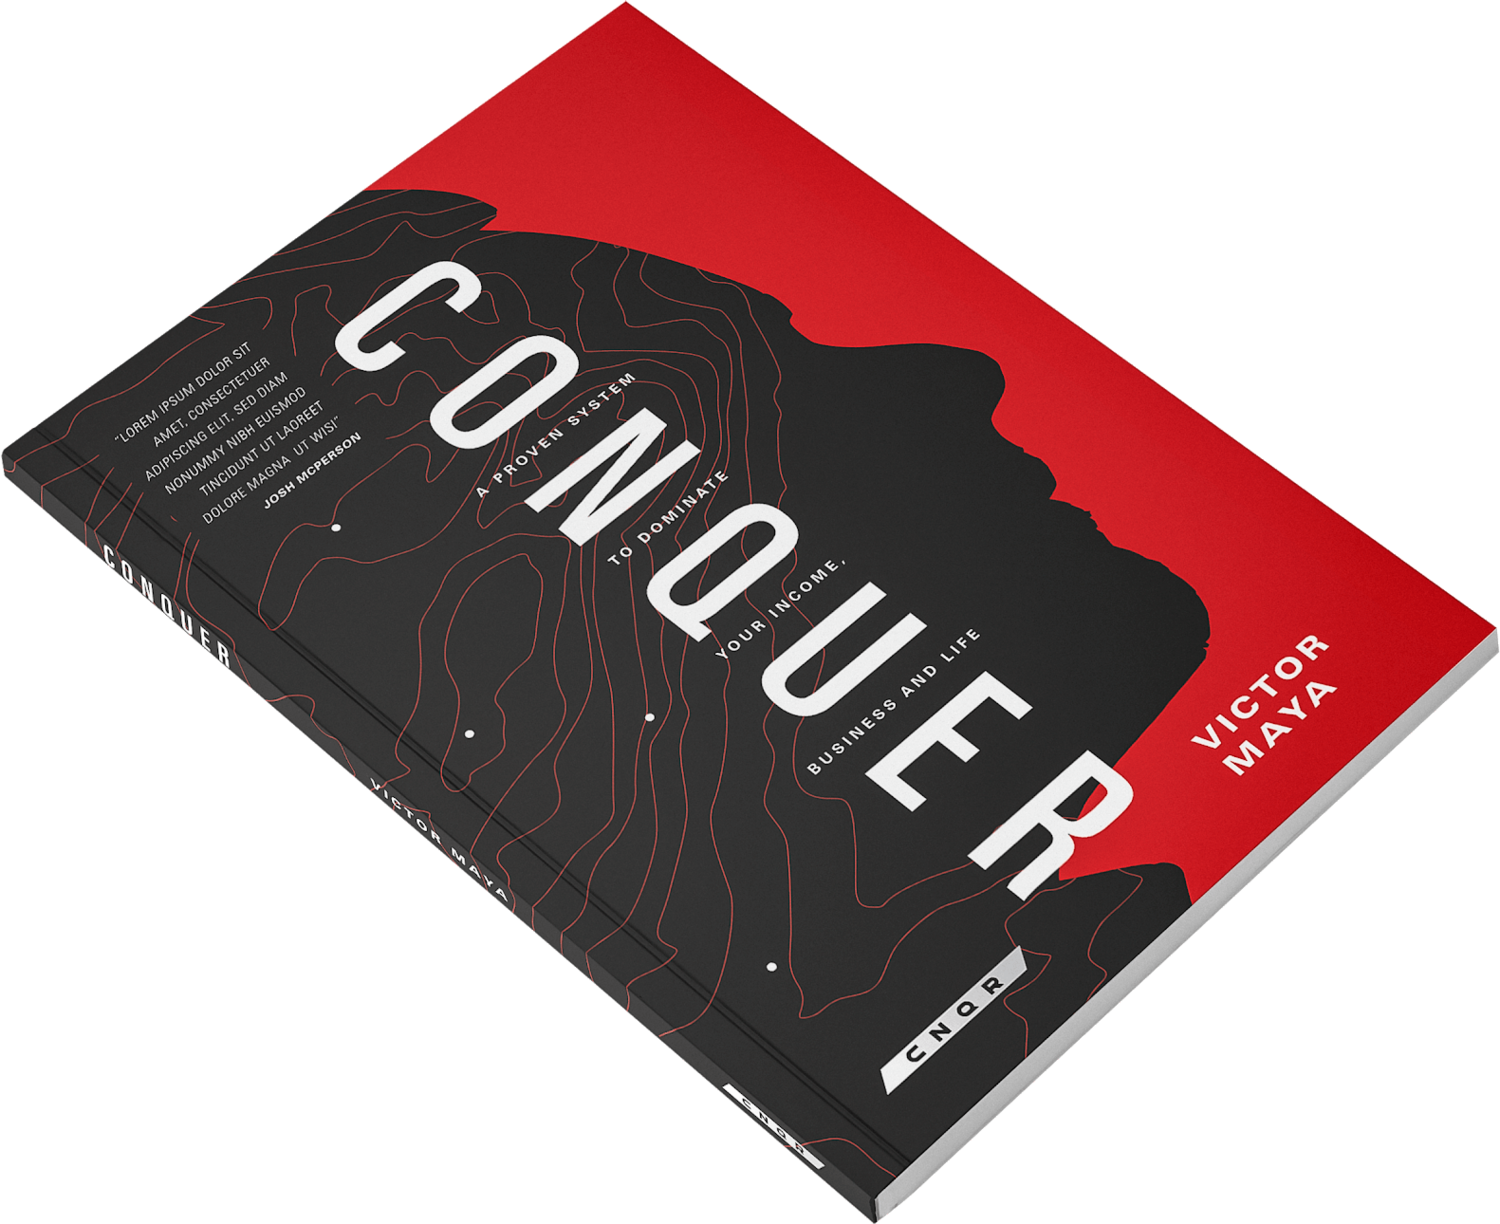 Conquer: A Proven System to Dominate your Income, Business and Life